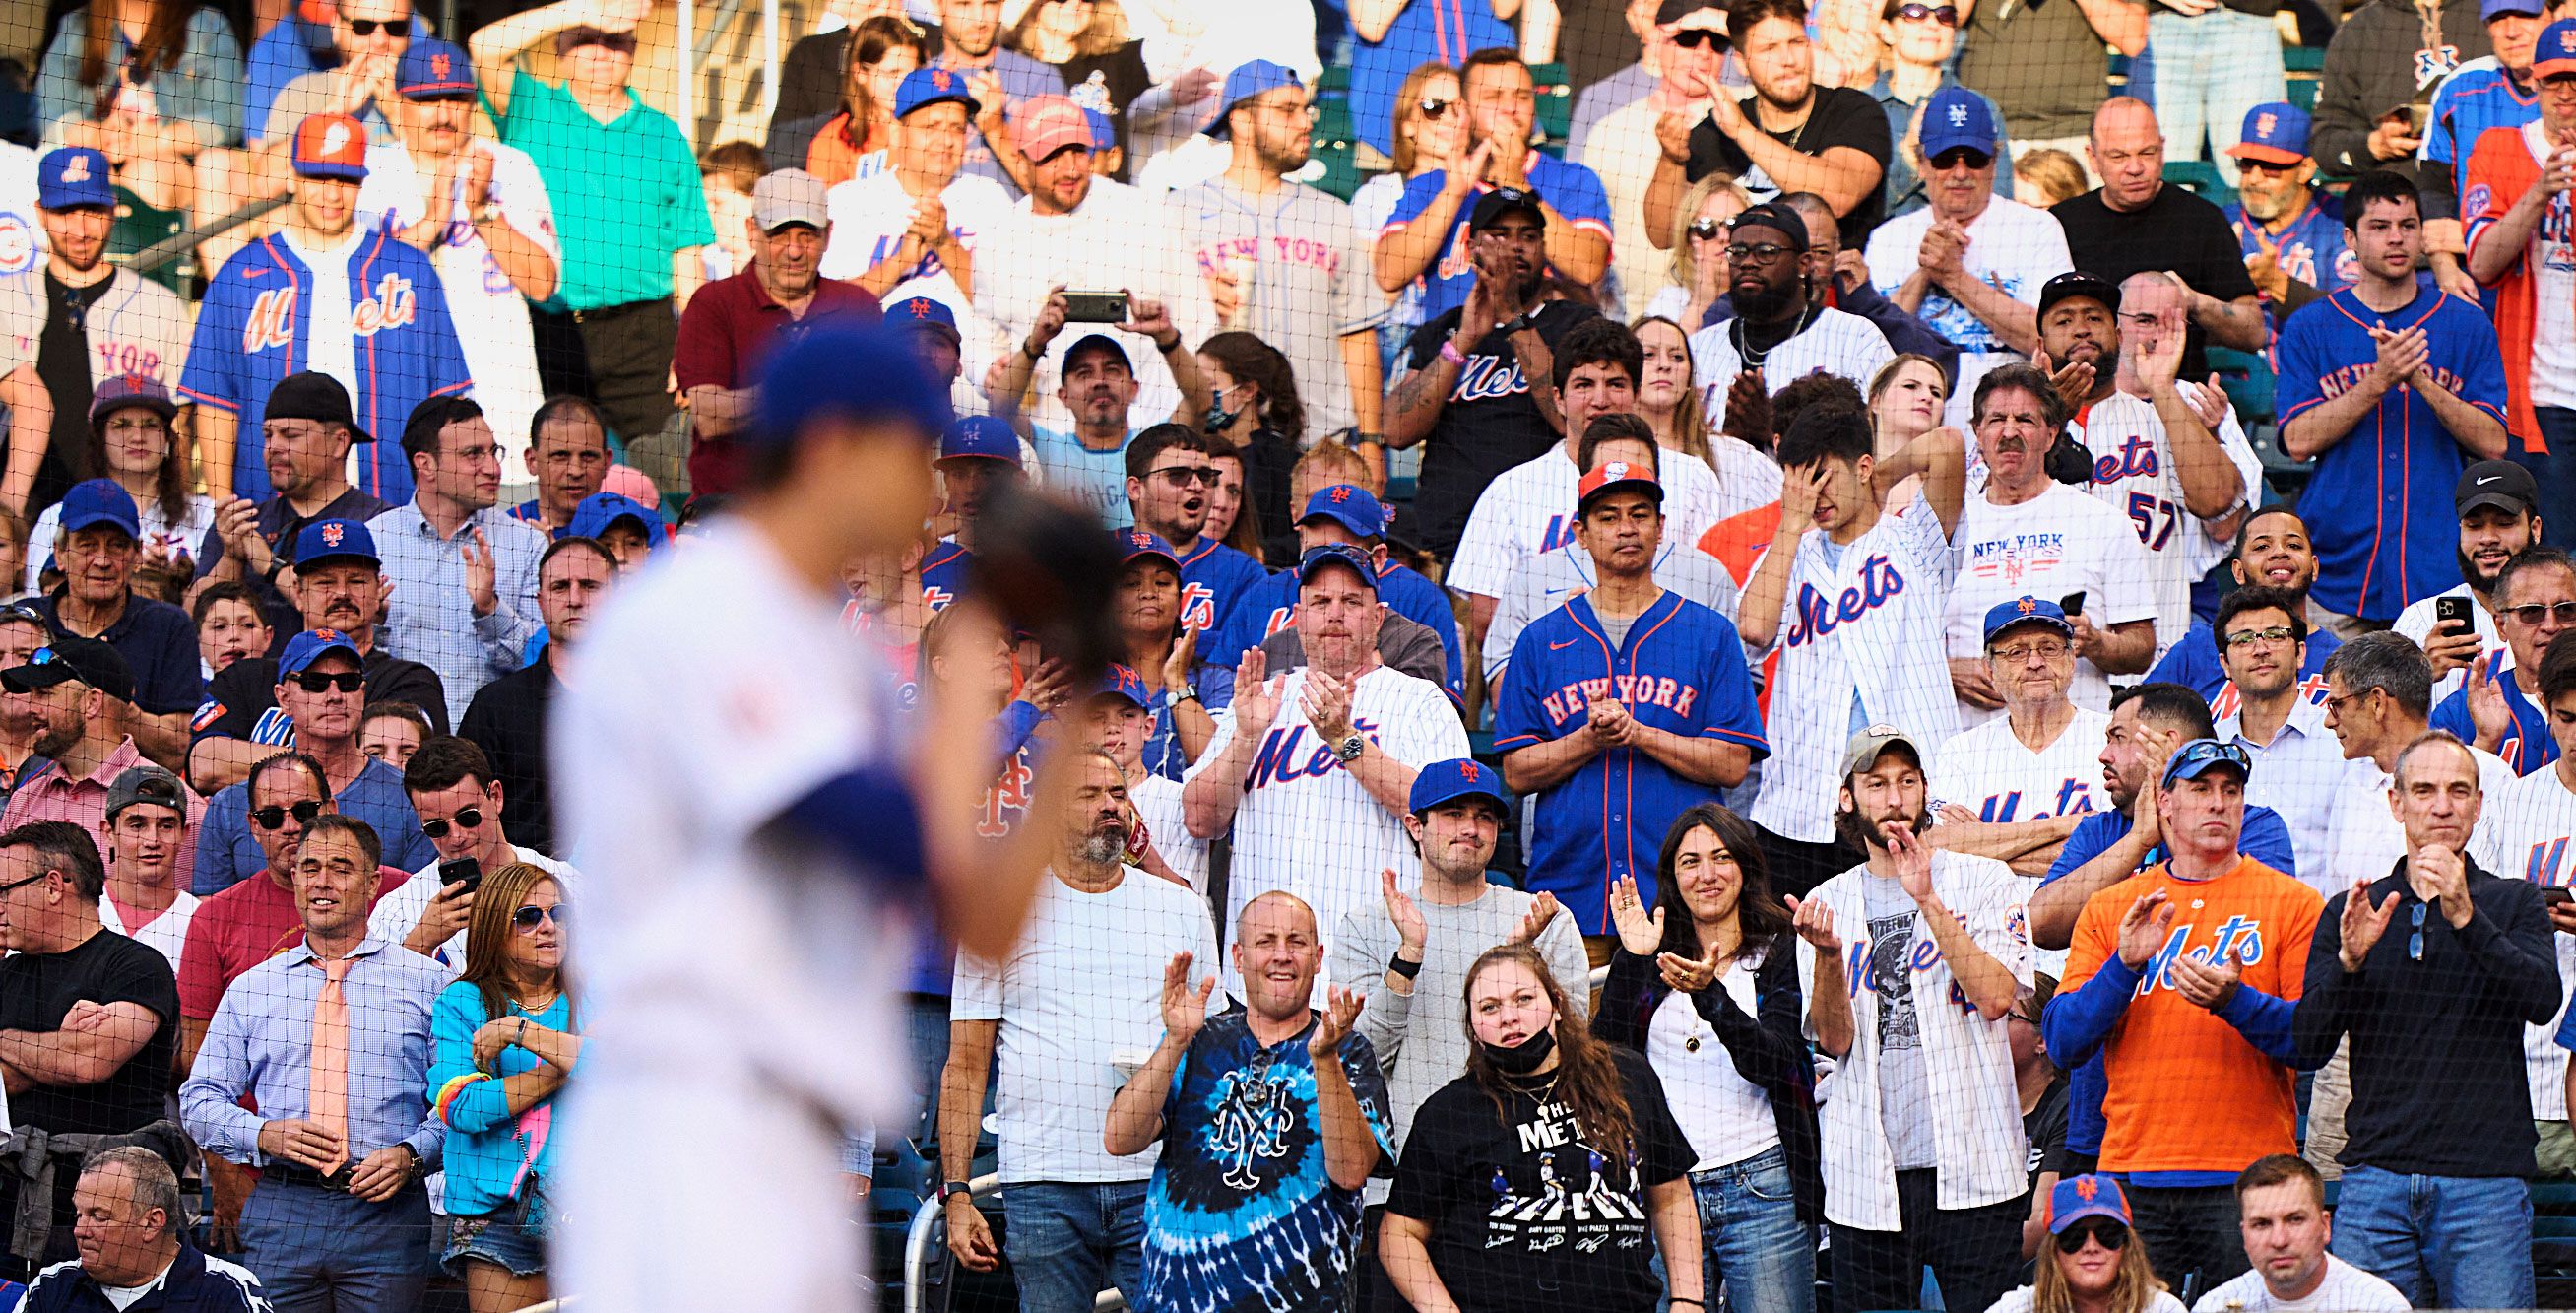 New York Now Has More Mets Fans Than Yankees Fans